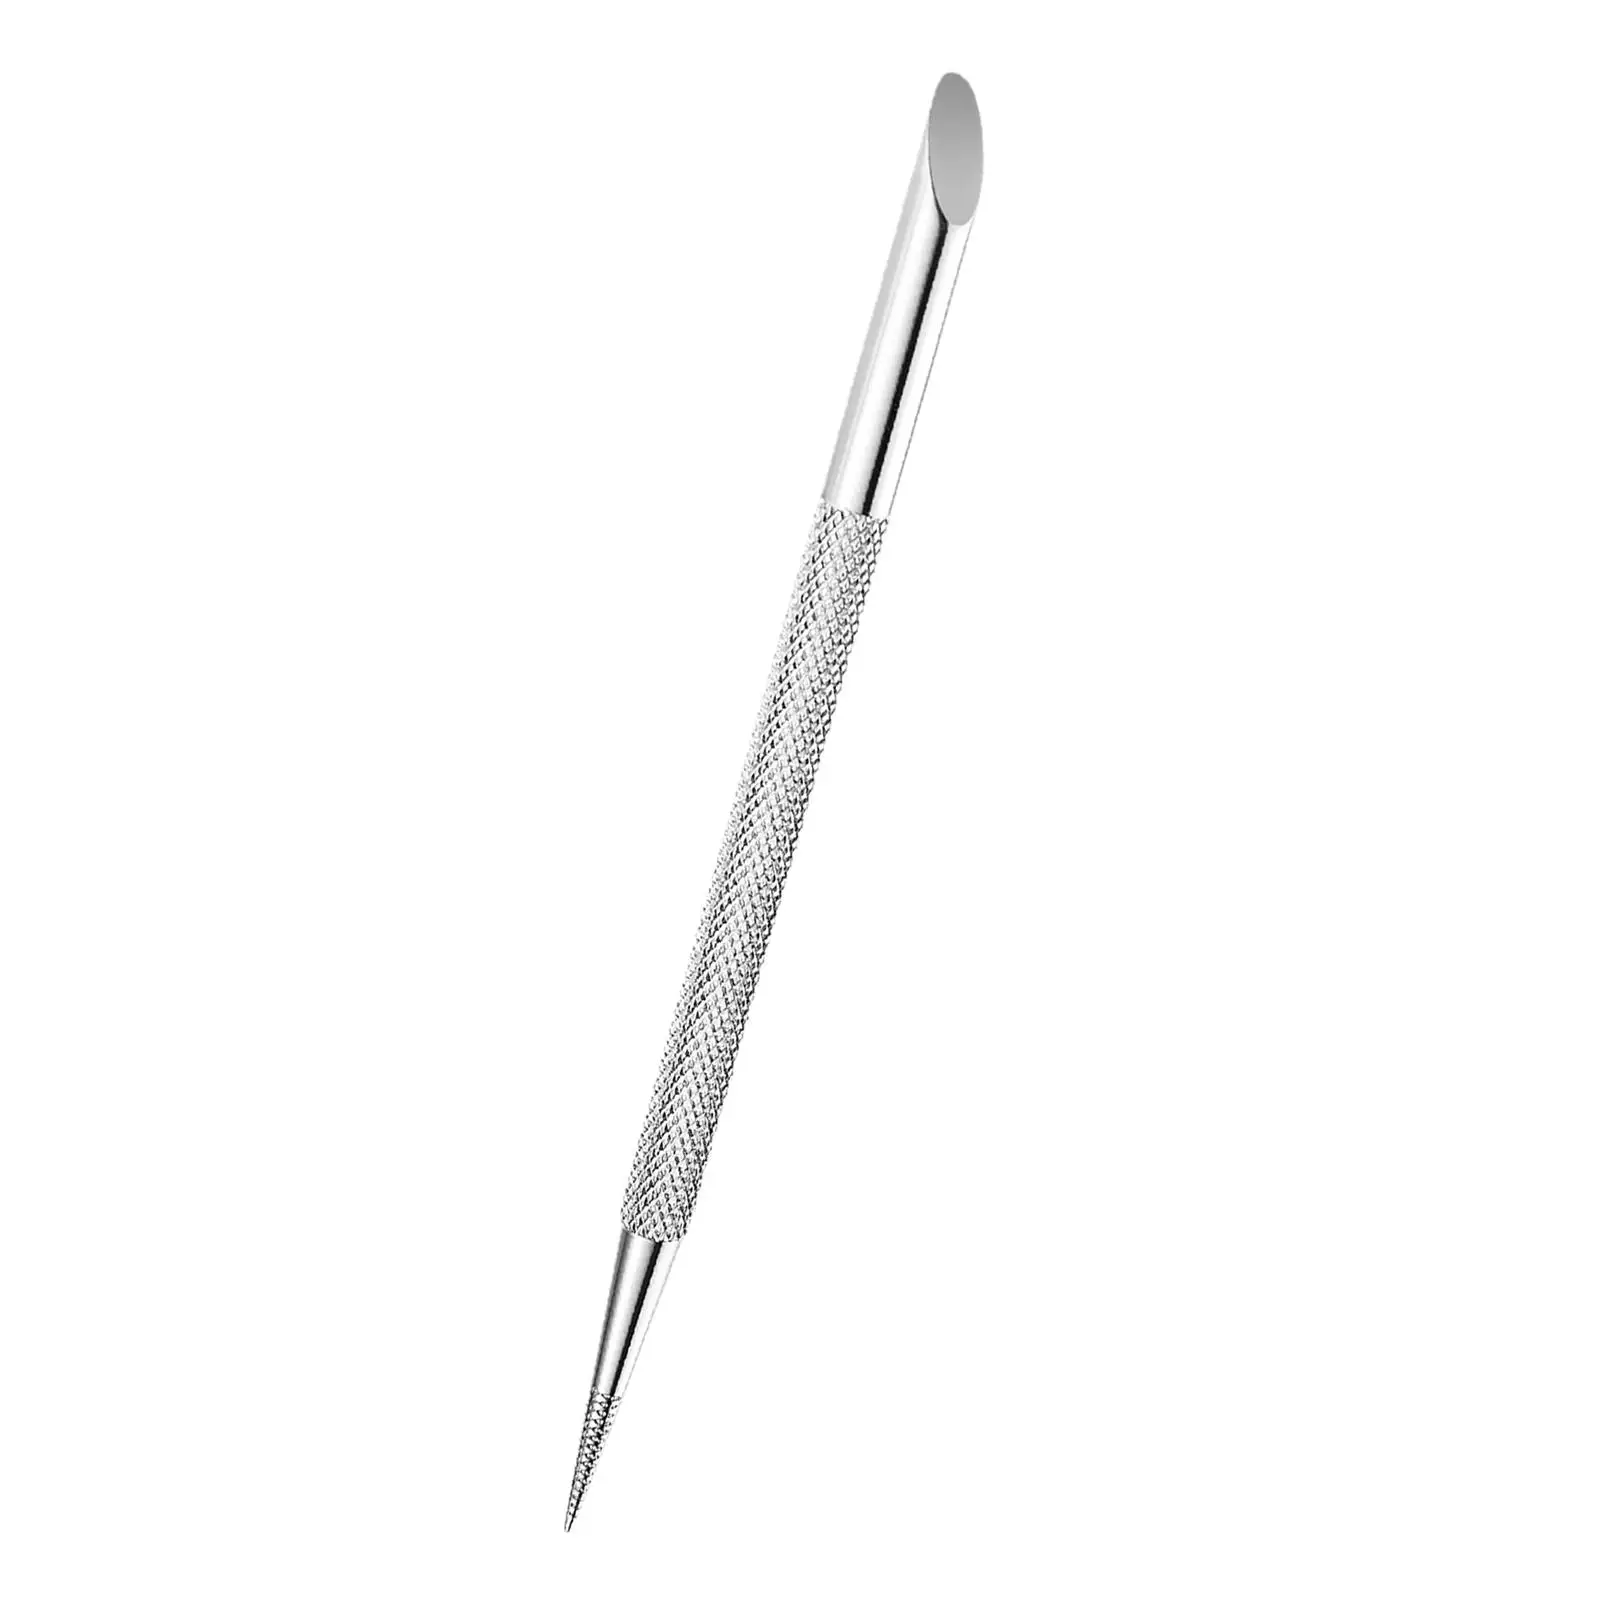 Double Ended Nail Cuticle Pusher Easy to Control Nail Art Cuticle Remove Nail Polish Remover